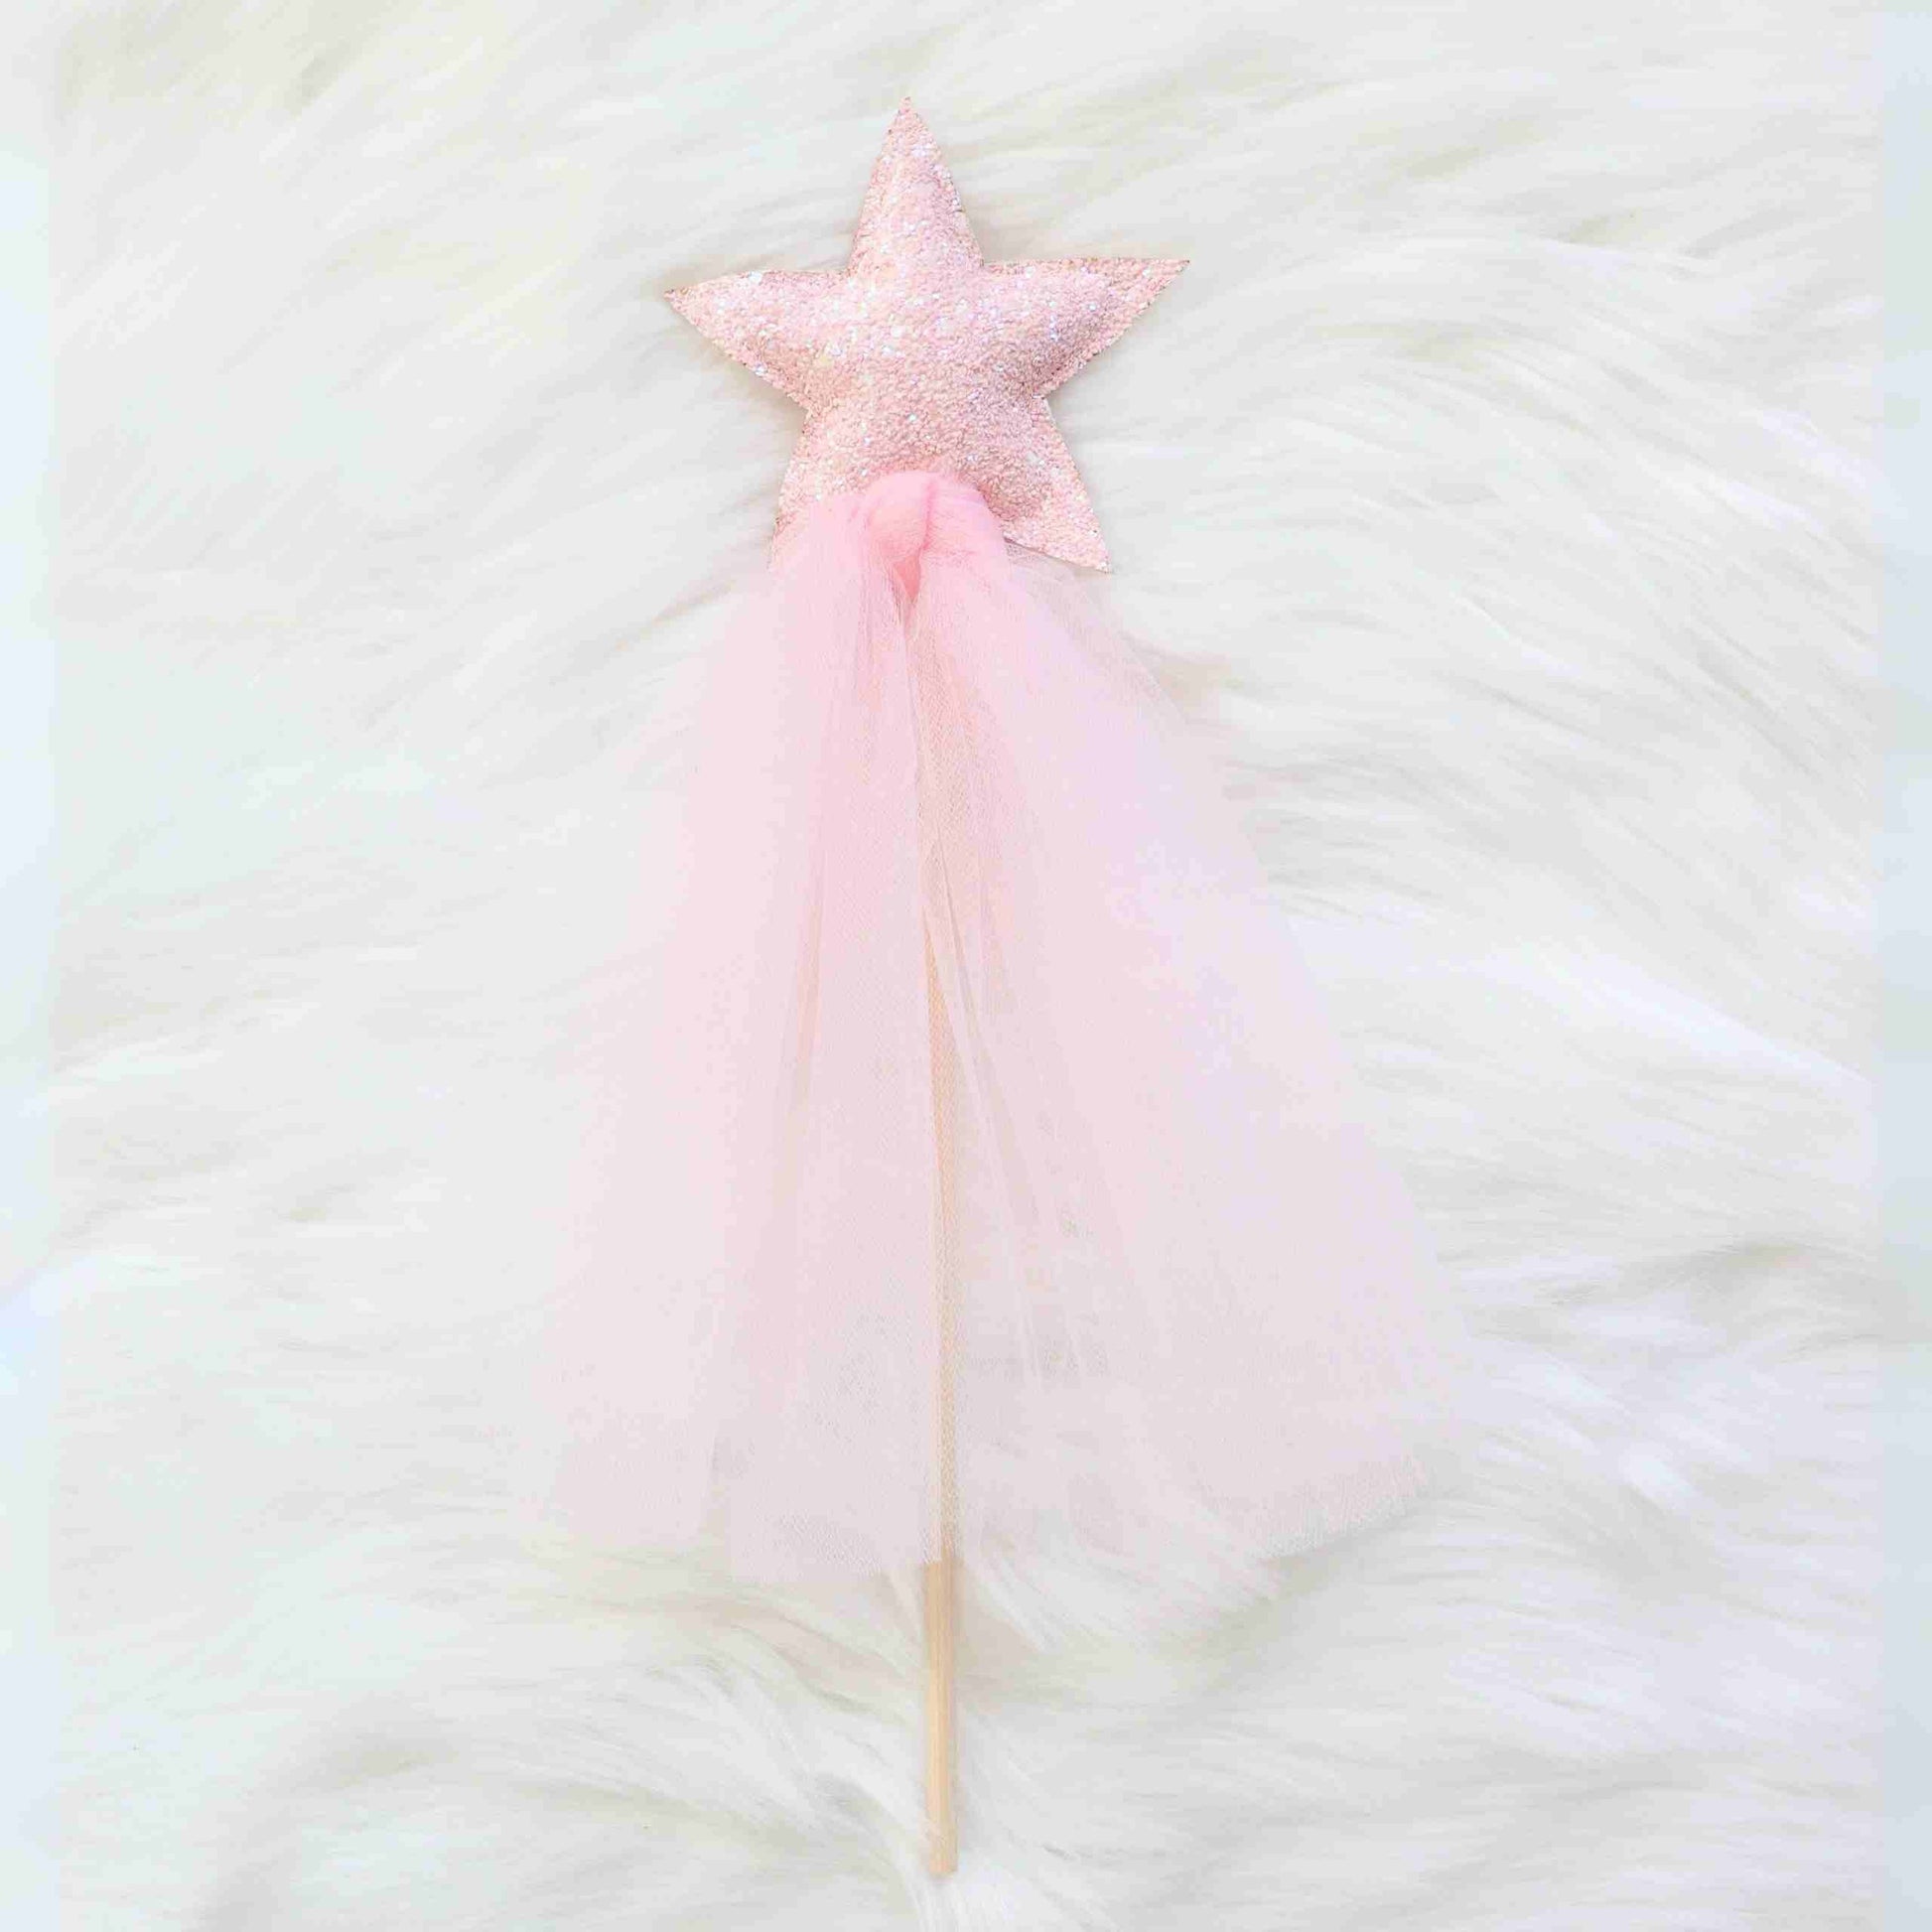 a pink star wand on a white fur background